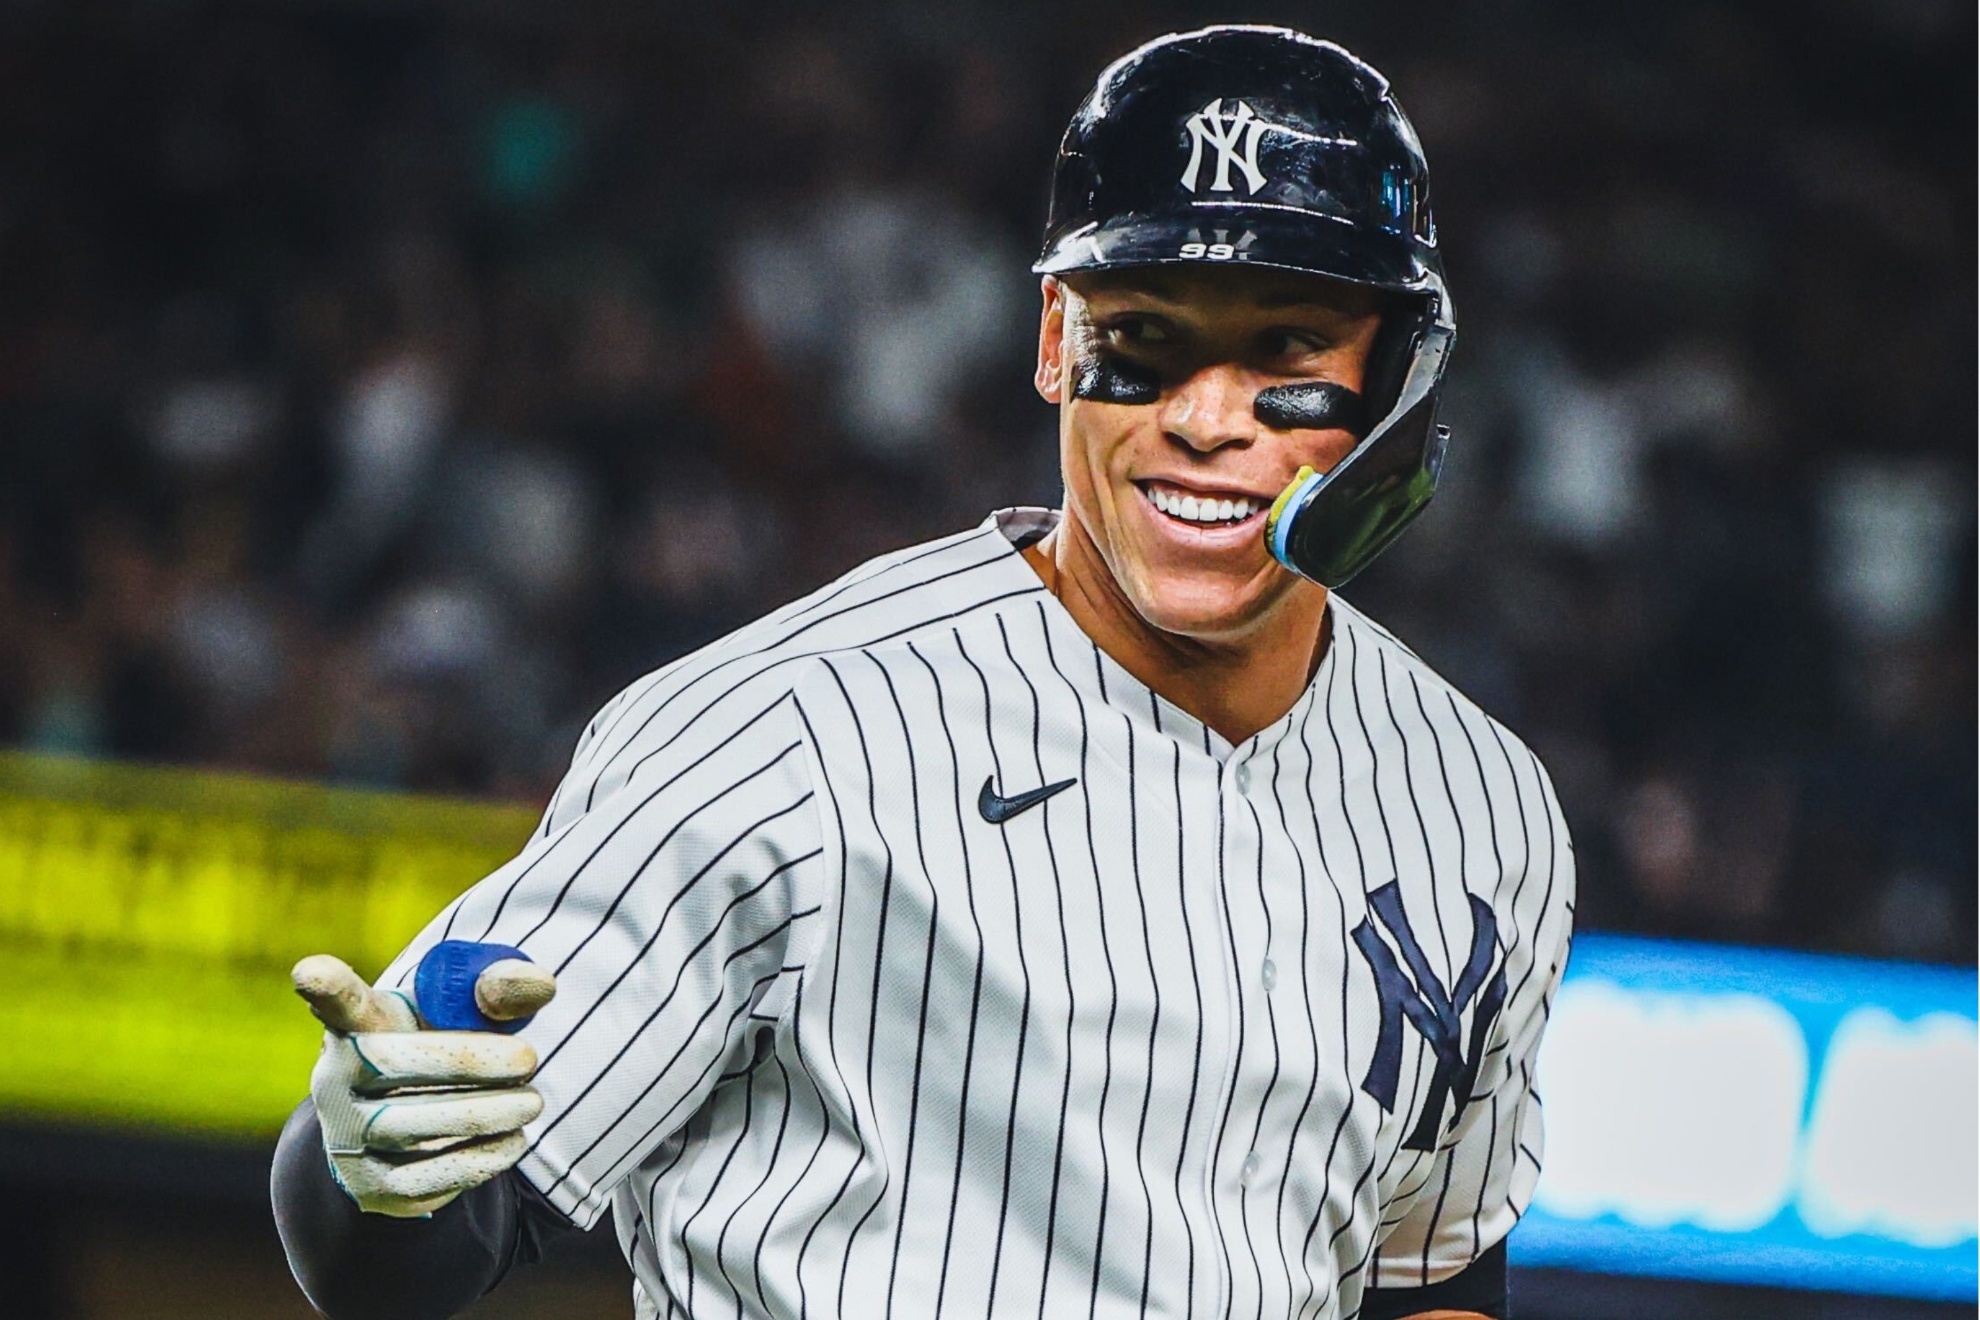 Aaron Judge hit three home runs in the Yankees 9-1 win against the Nationals